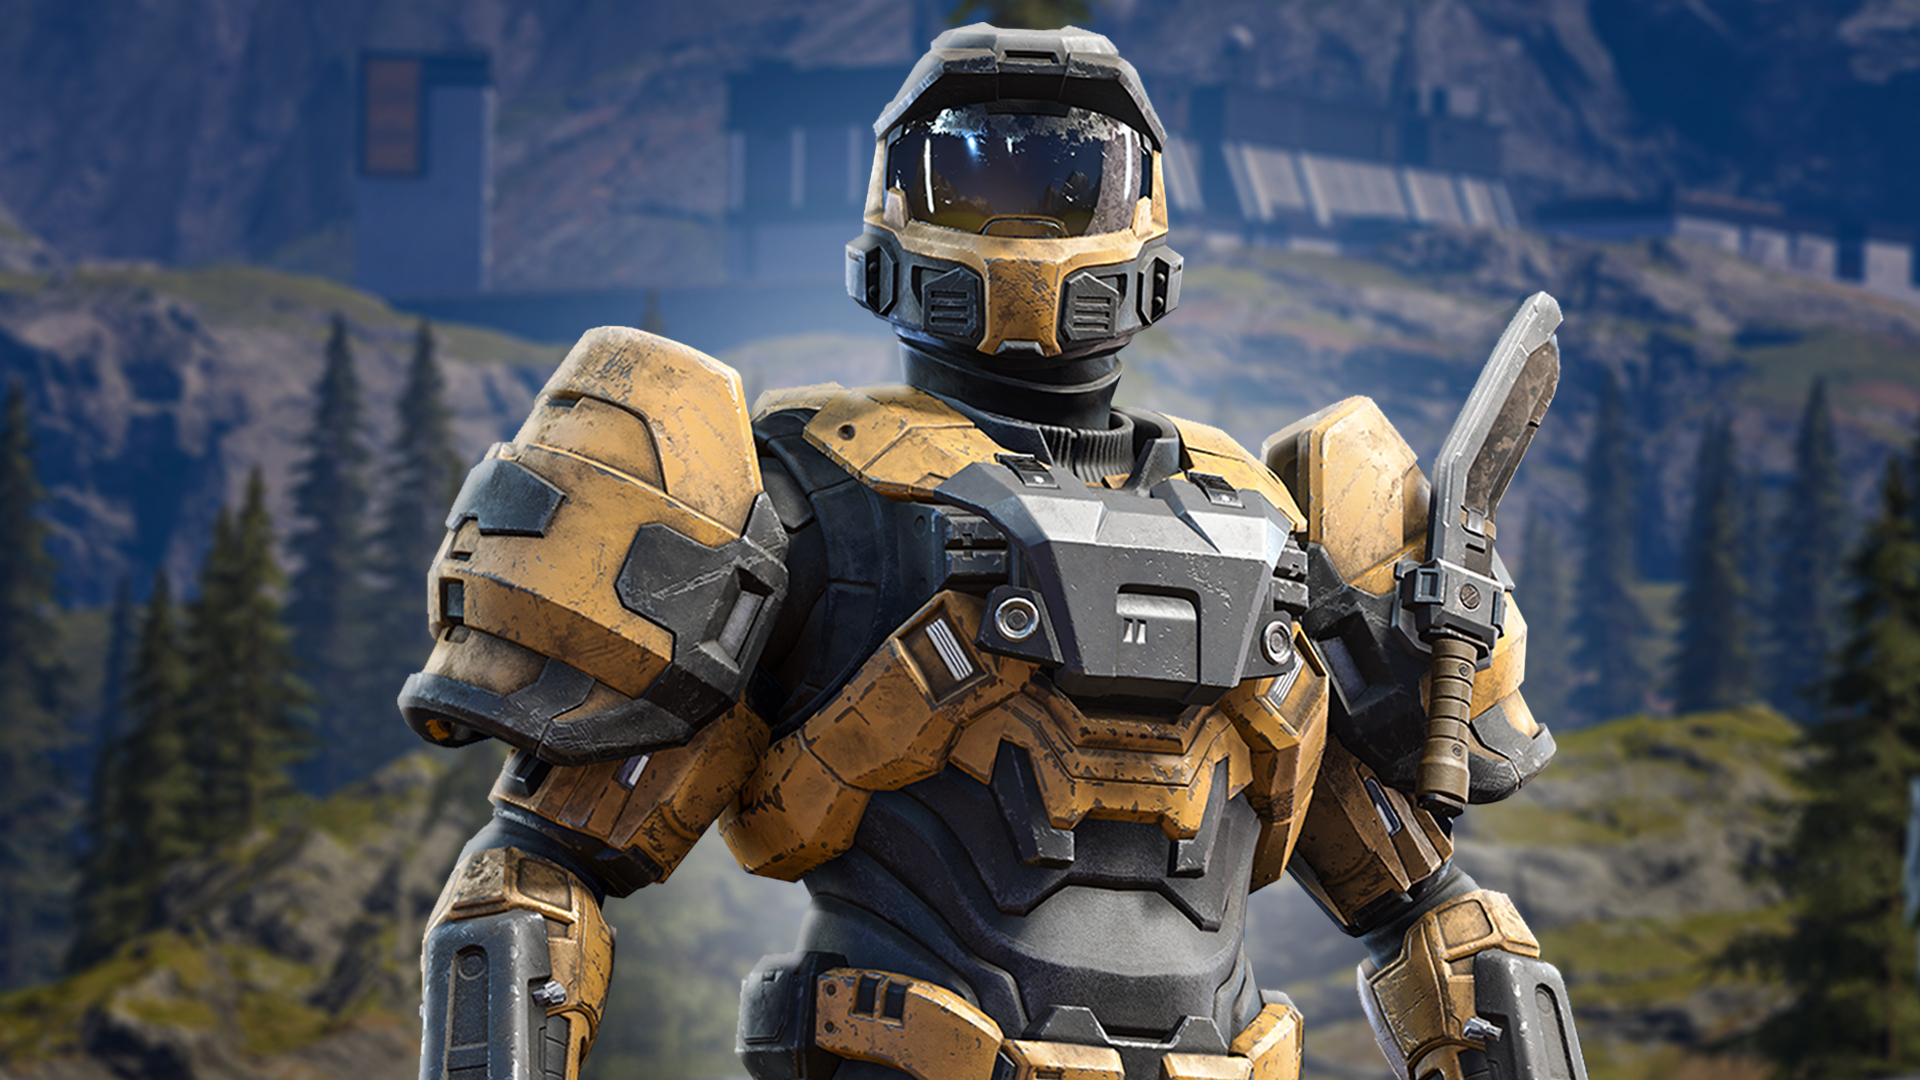 Halo Infinite Shares Details About Multiplayer, Customization